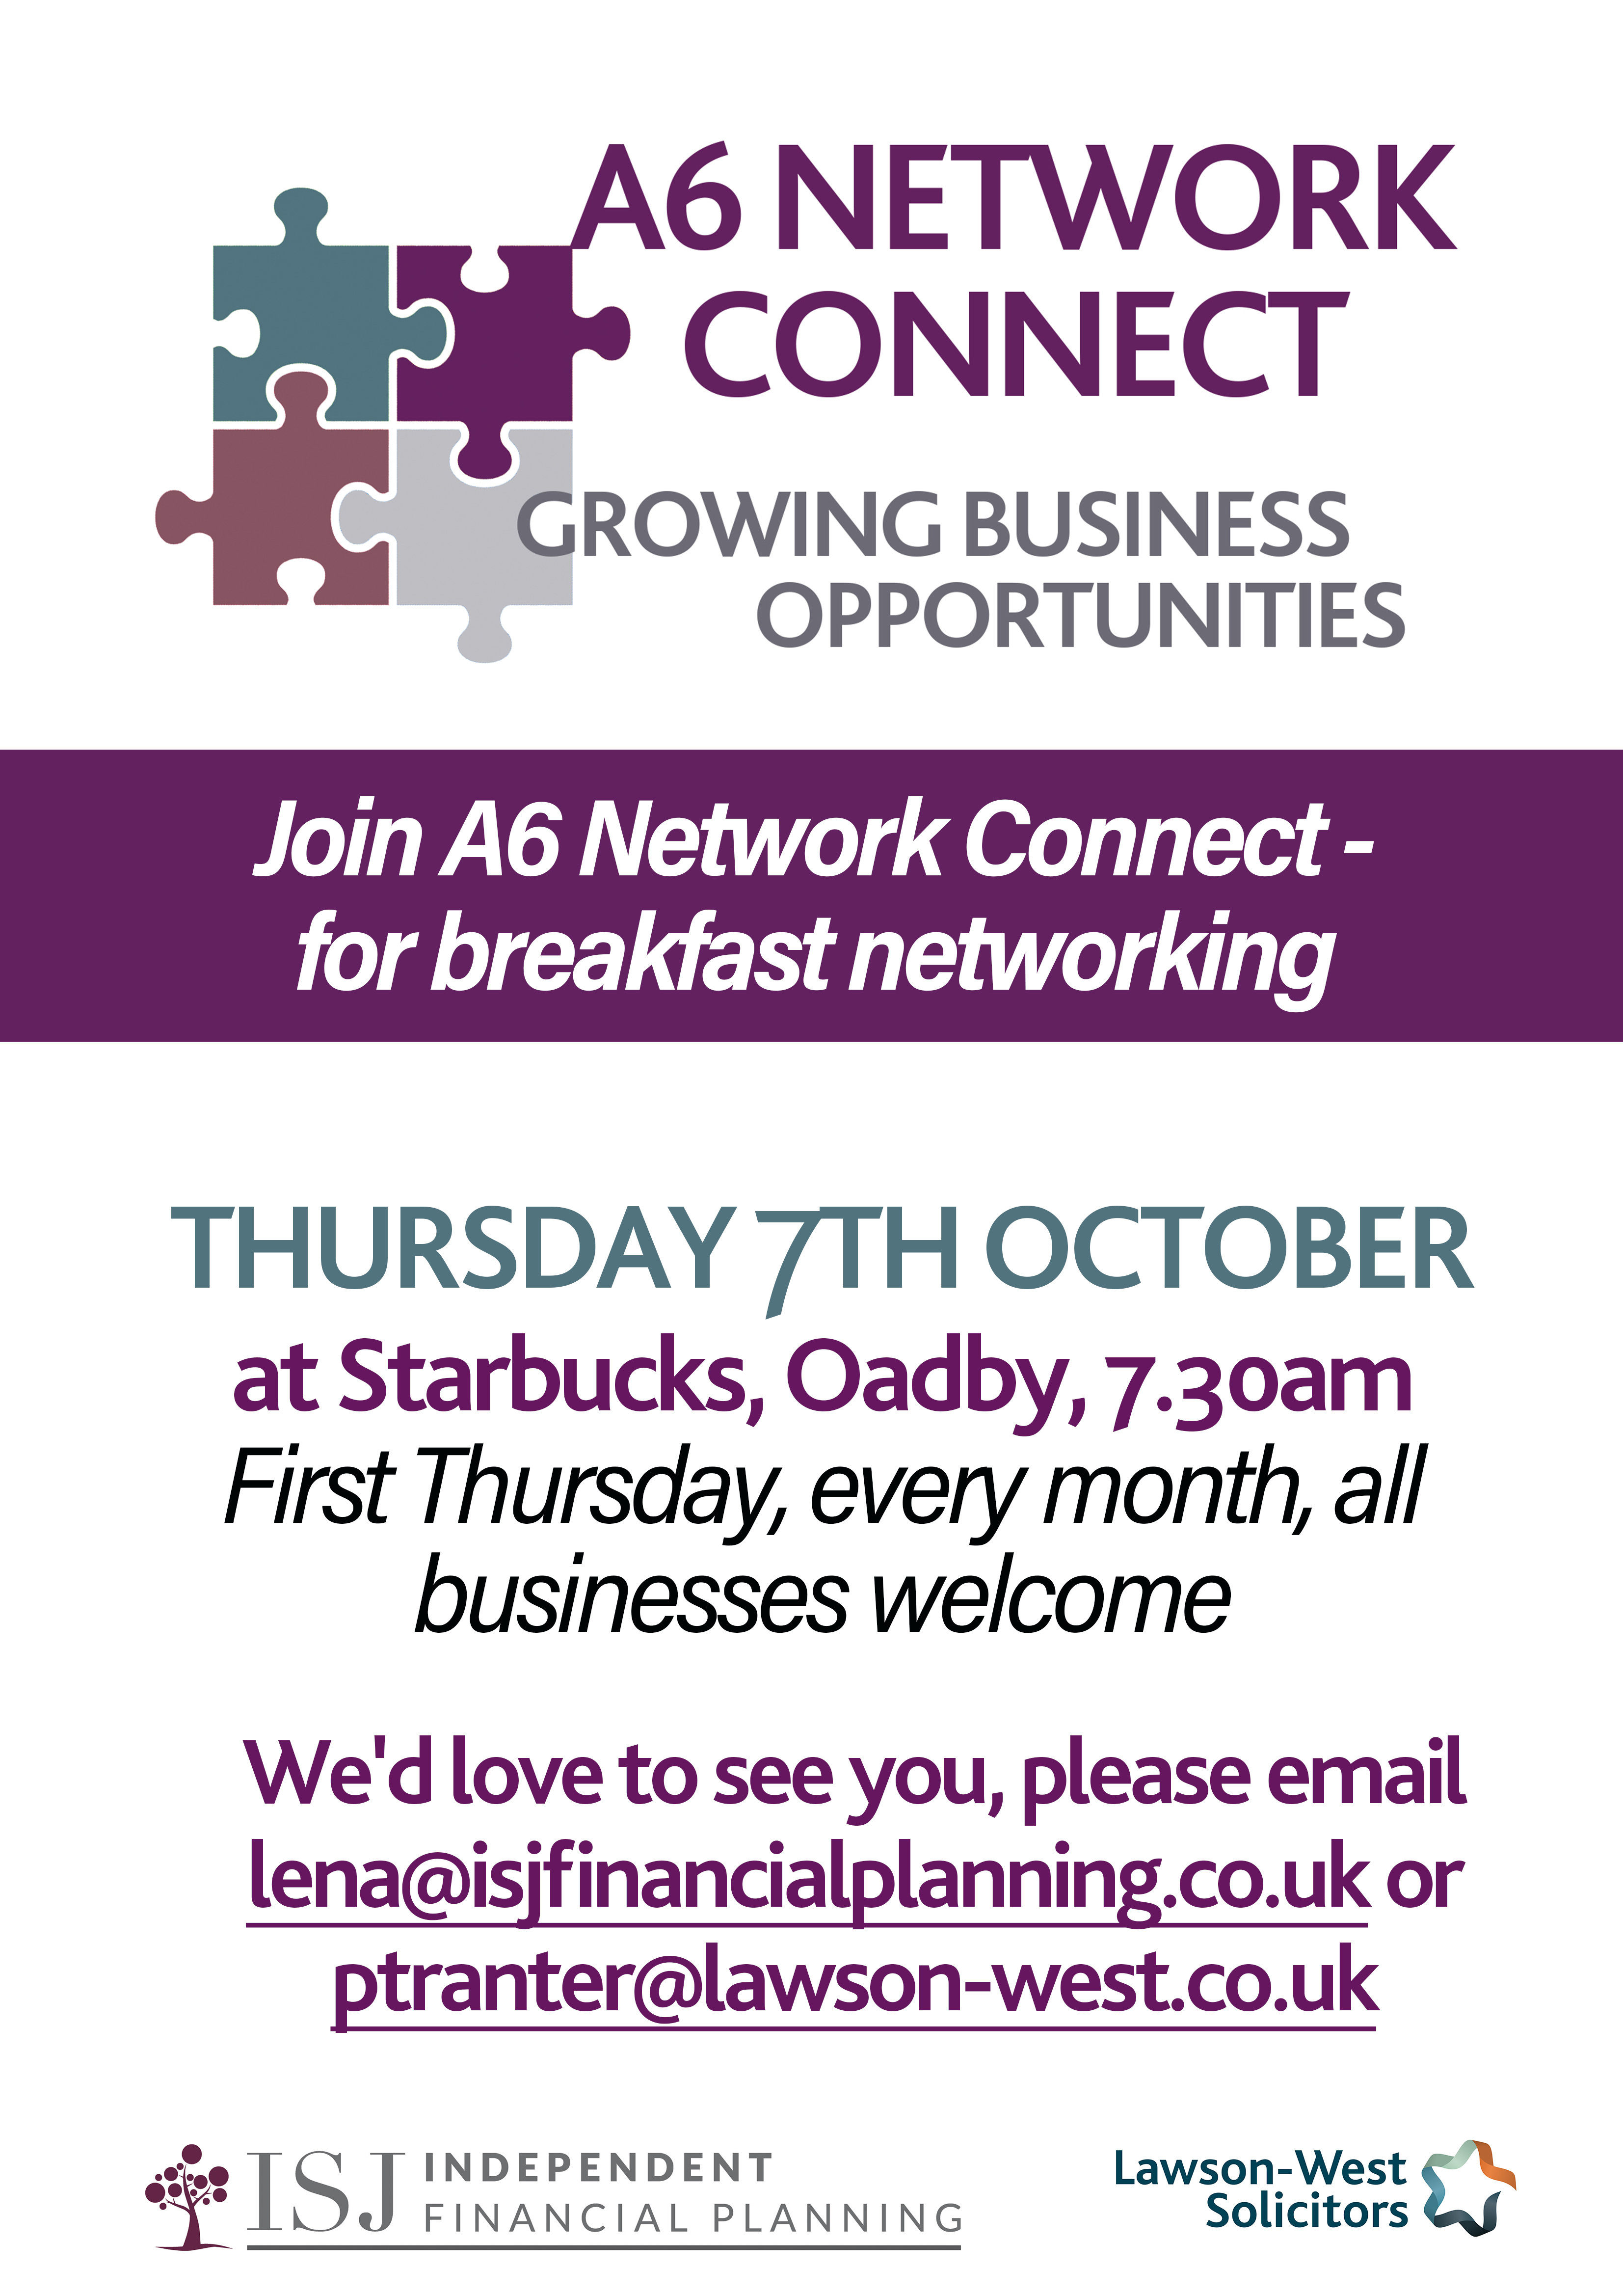 A6 Network Connect 7th October networking event, Leicester